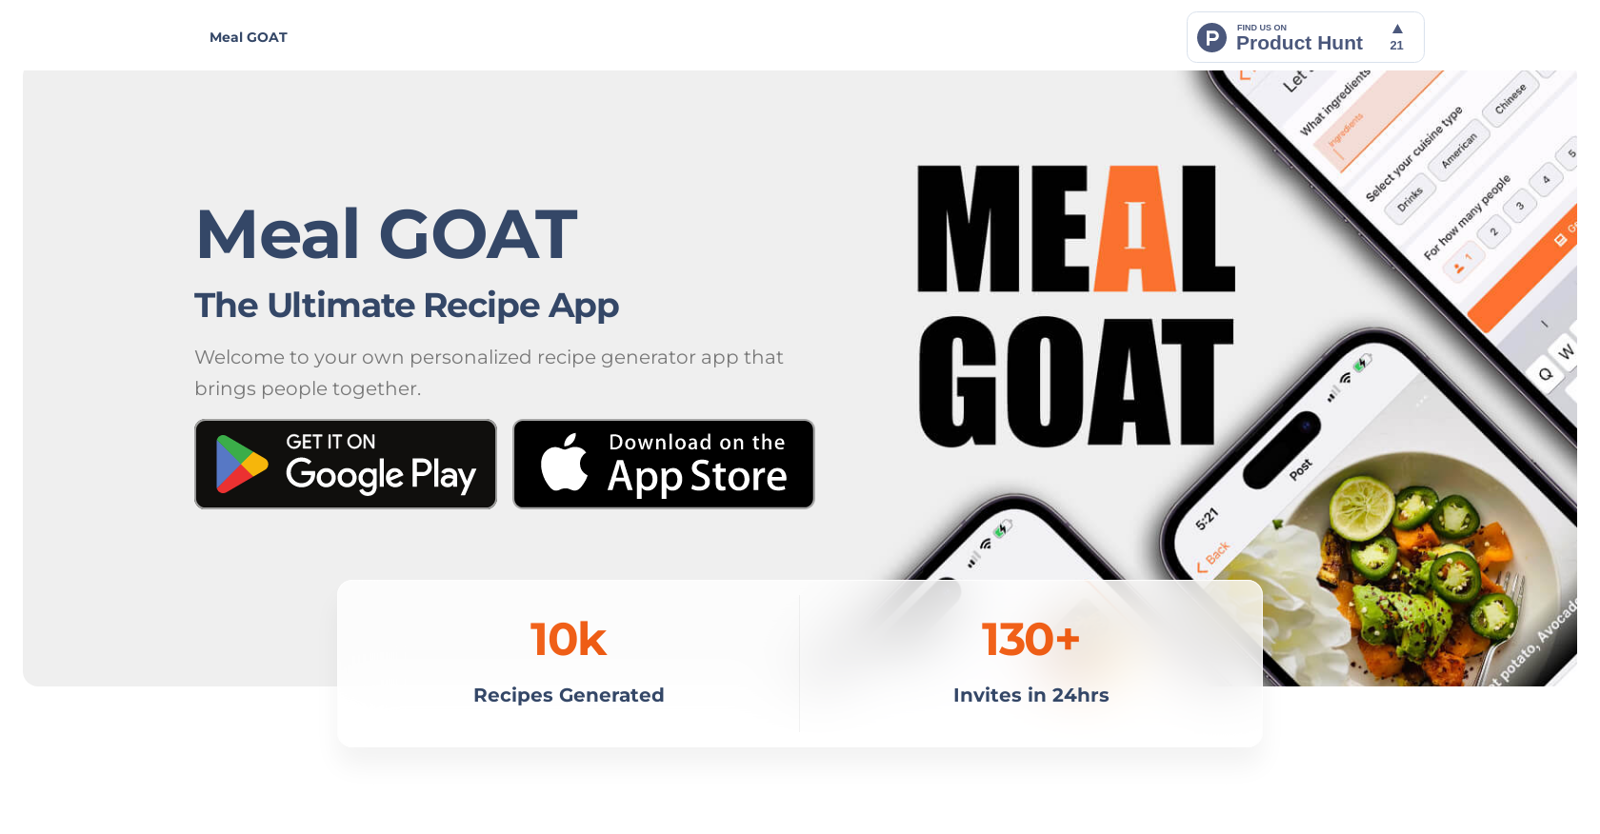 Meal GOAT